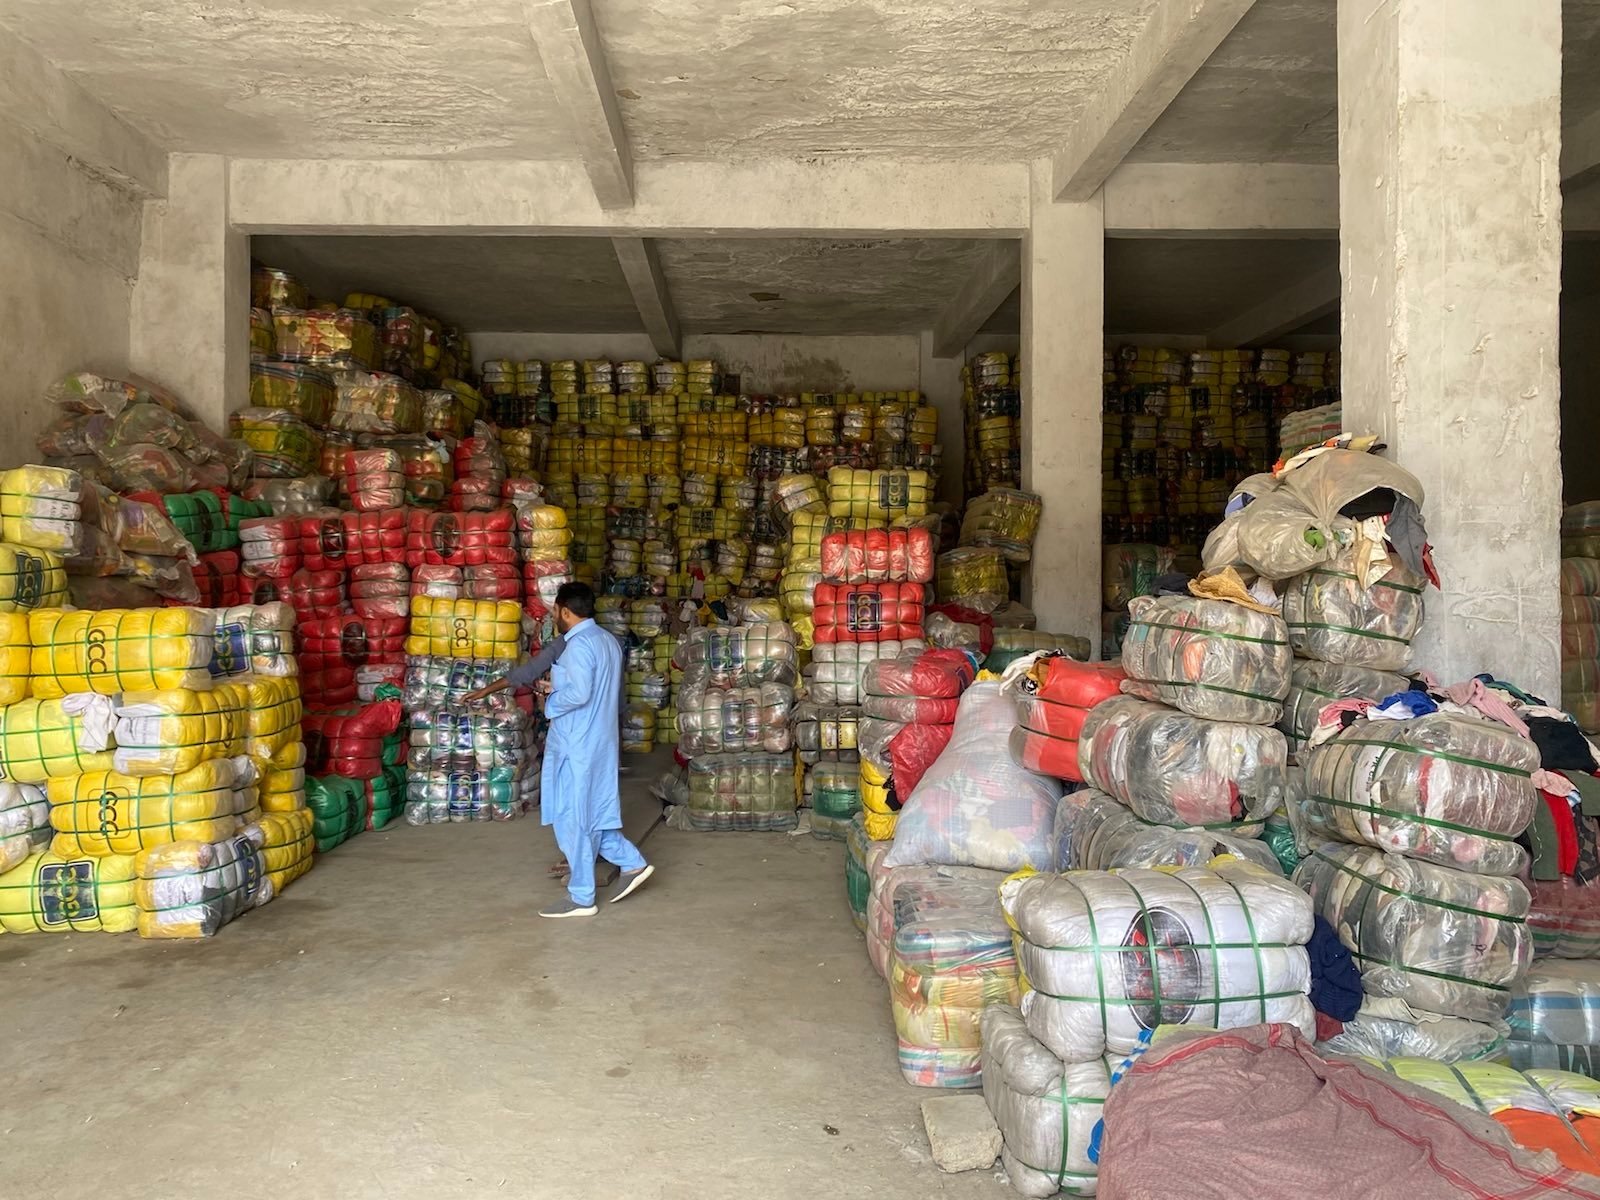  The packages contain products of the same kind which are then sorted into smaller packages before they are sold to business partners. Photo: Adil Jawad 